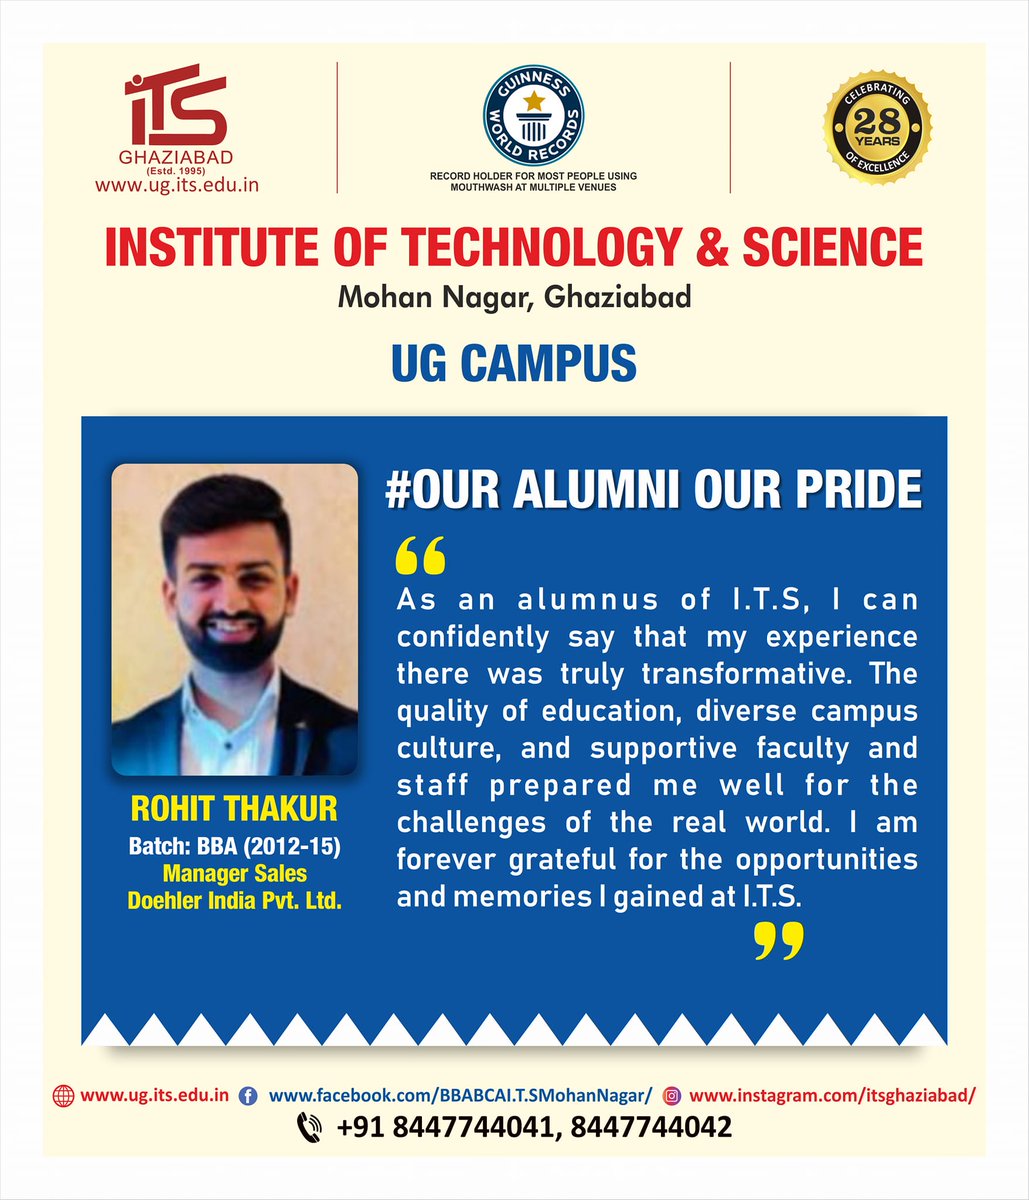 #ouralumniourpride Mr. Rohit Thakur, BBA Alumni, Batch 2012-15, working at Doehler India Pvt. Ltd as manager has shared his experience about I.T.S Mohan Nagar Ghaziabad UG Campus.